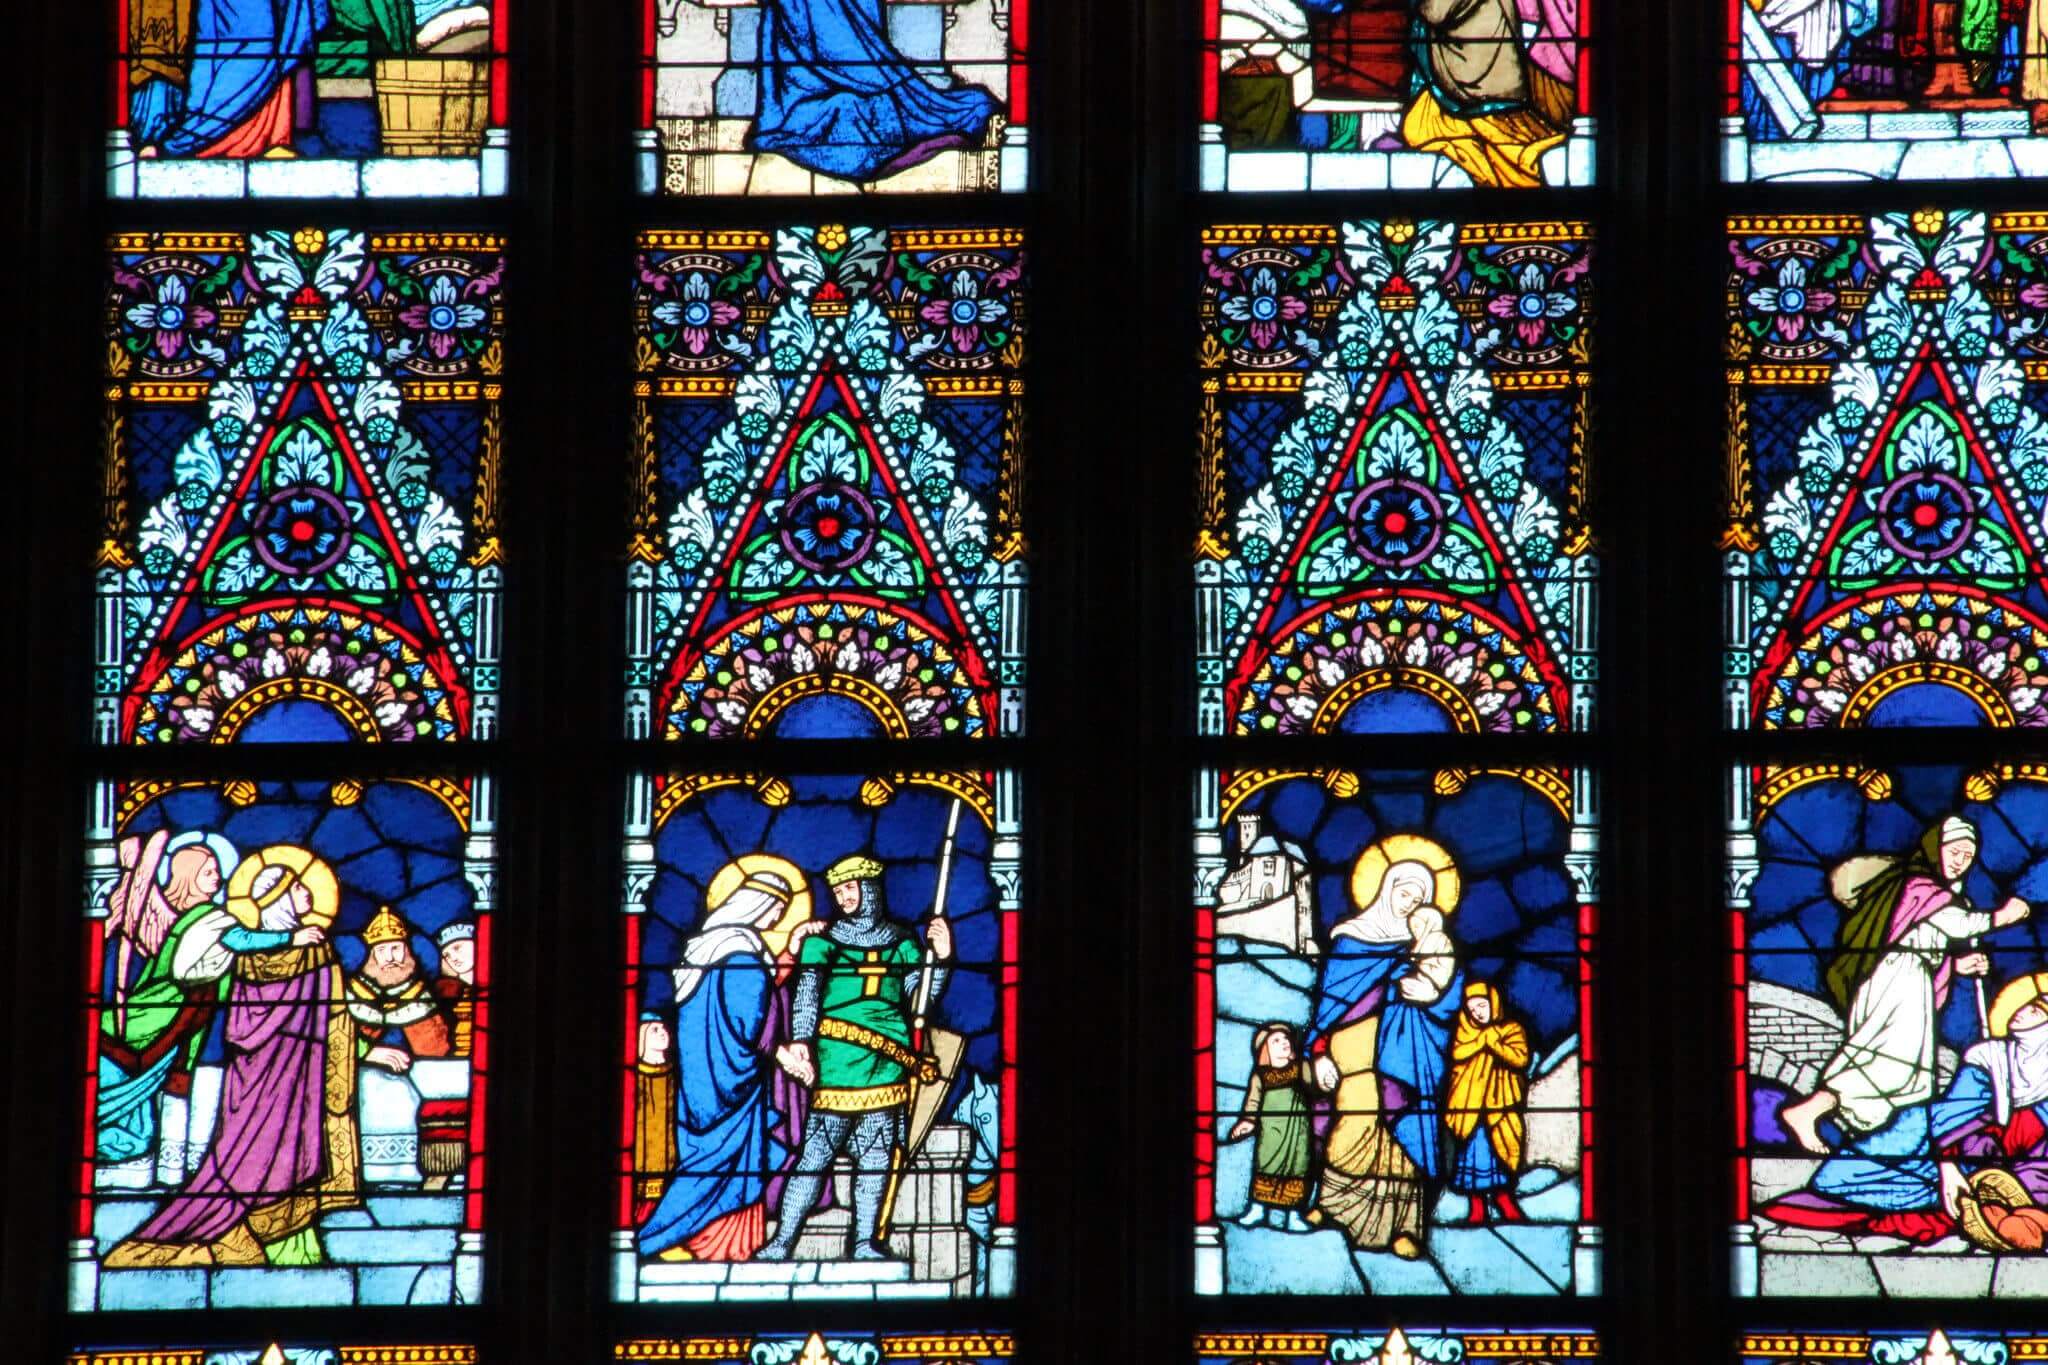 Matthias Church on Uniworld River Cruise River Beatrice Stained glass